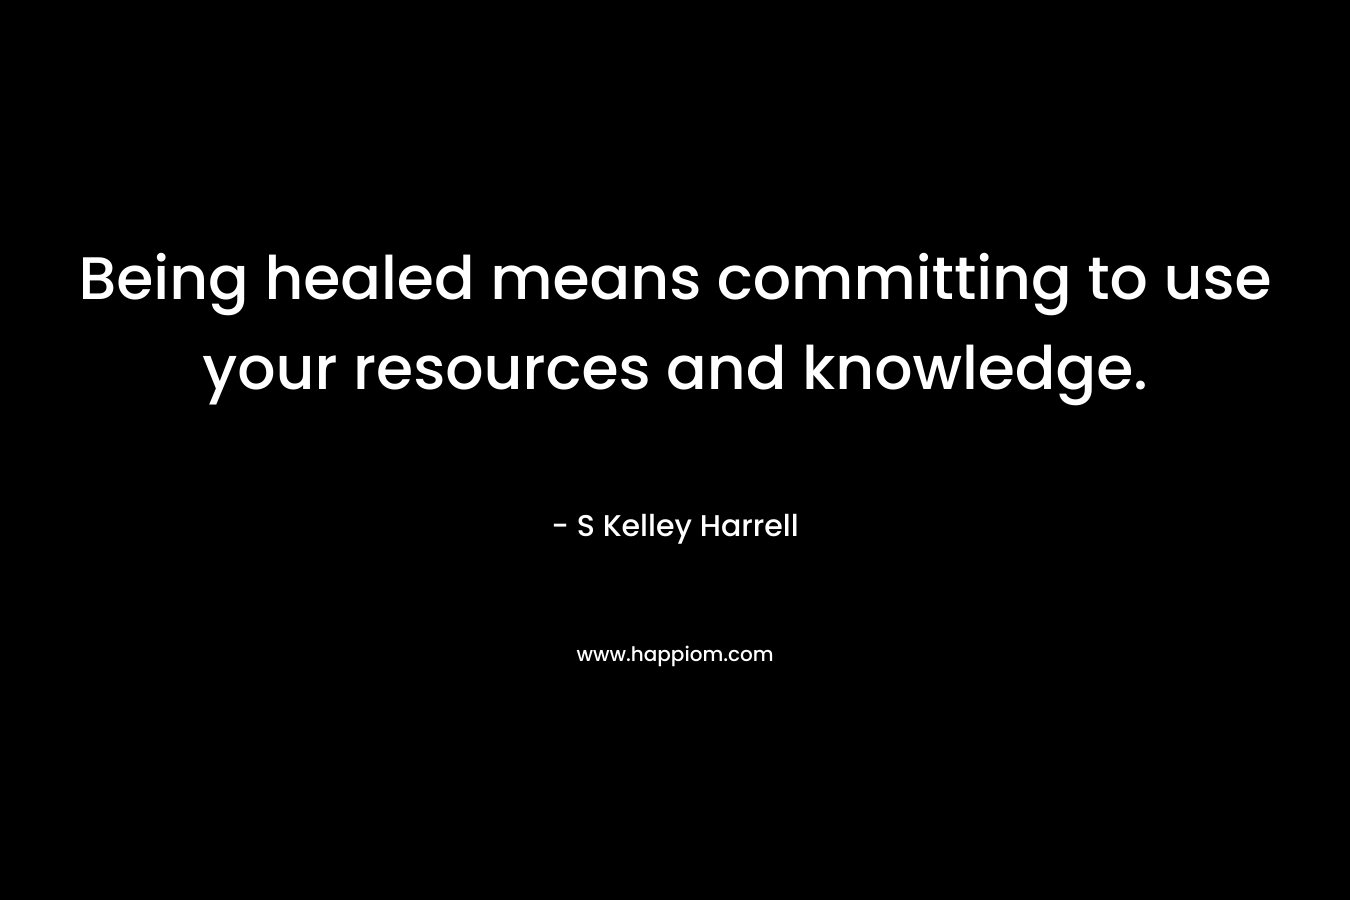 Being healed means committing to use your resources and knowledge. – S Kelley Harrell